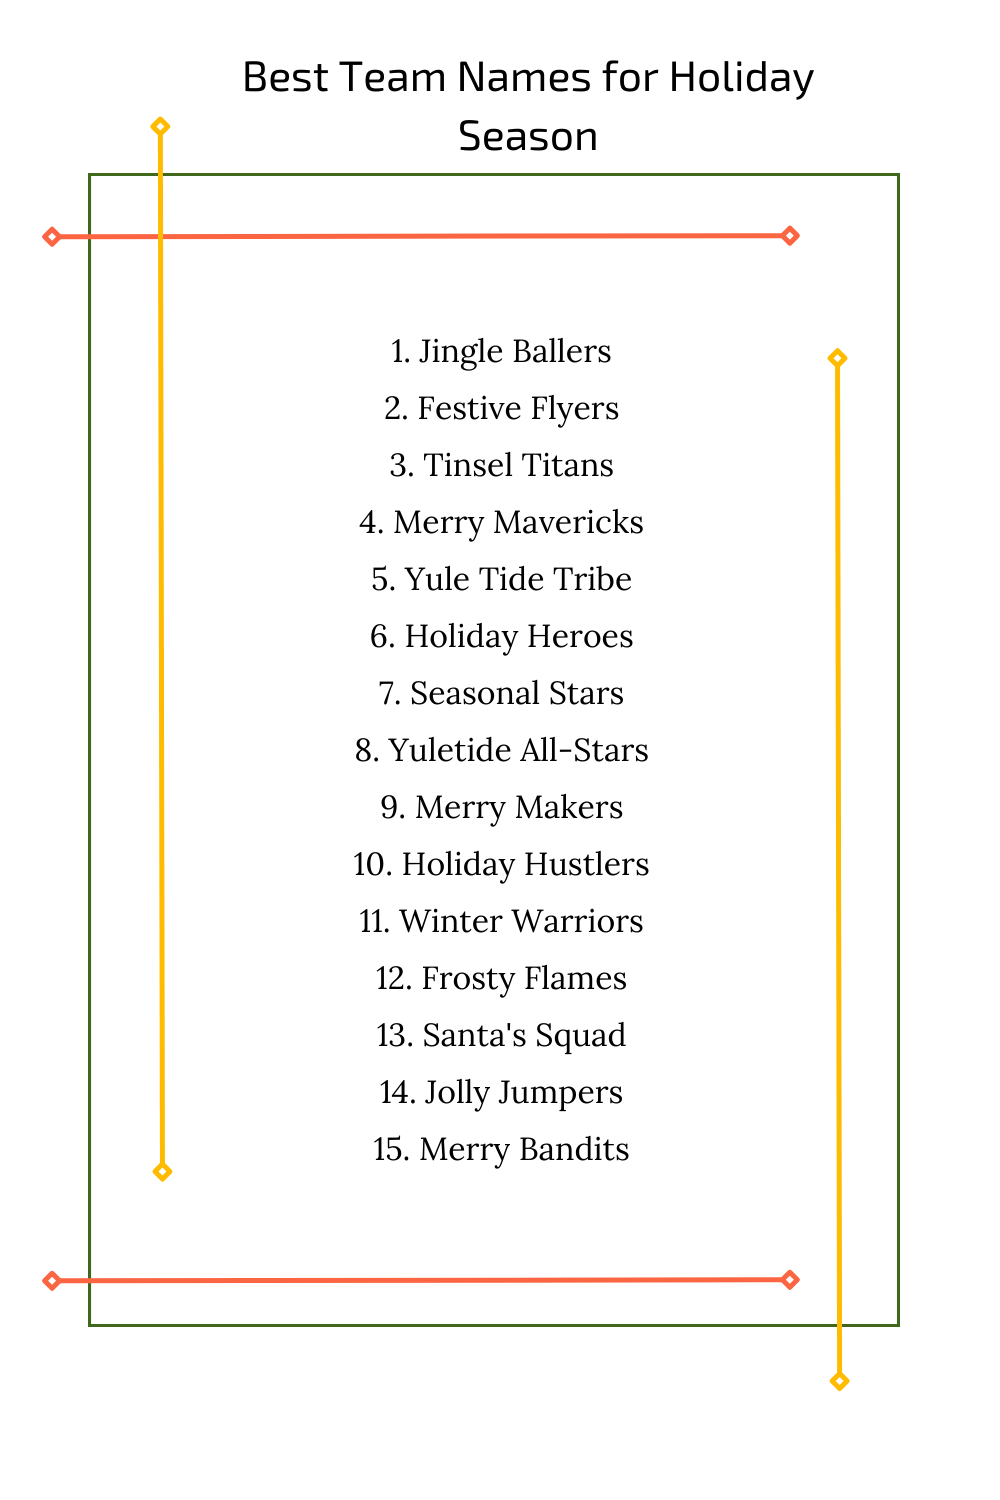 Best Team Names for Holiday Season